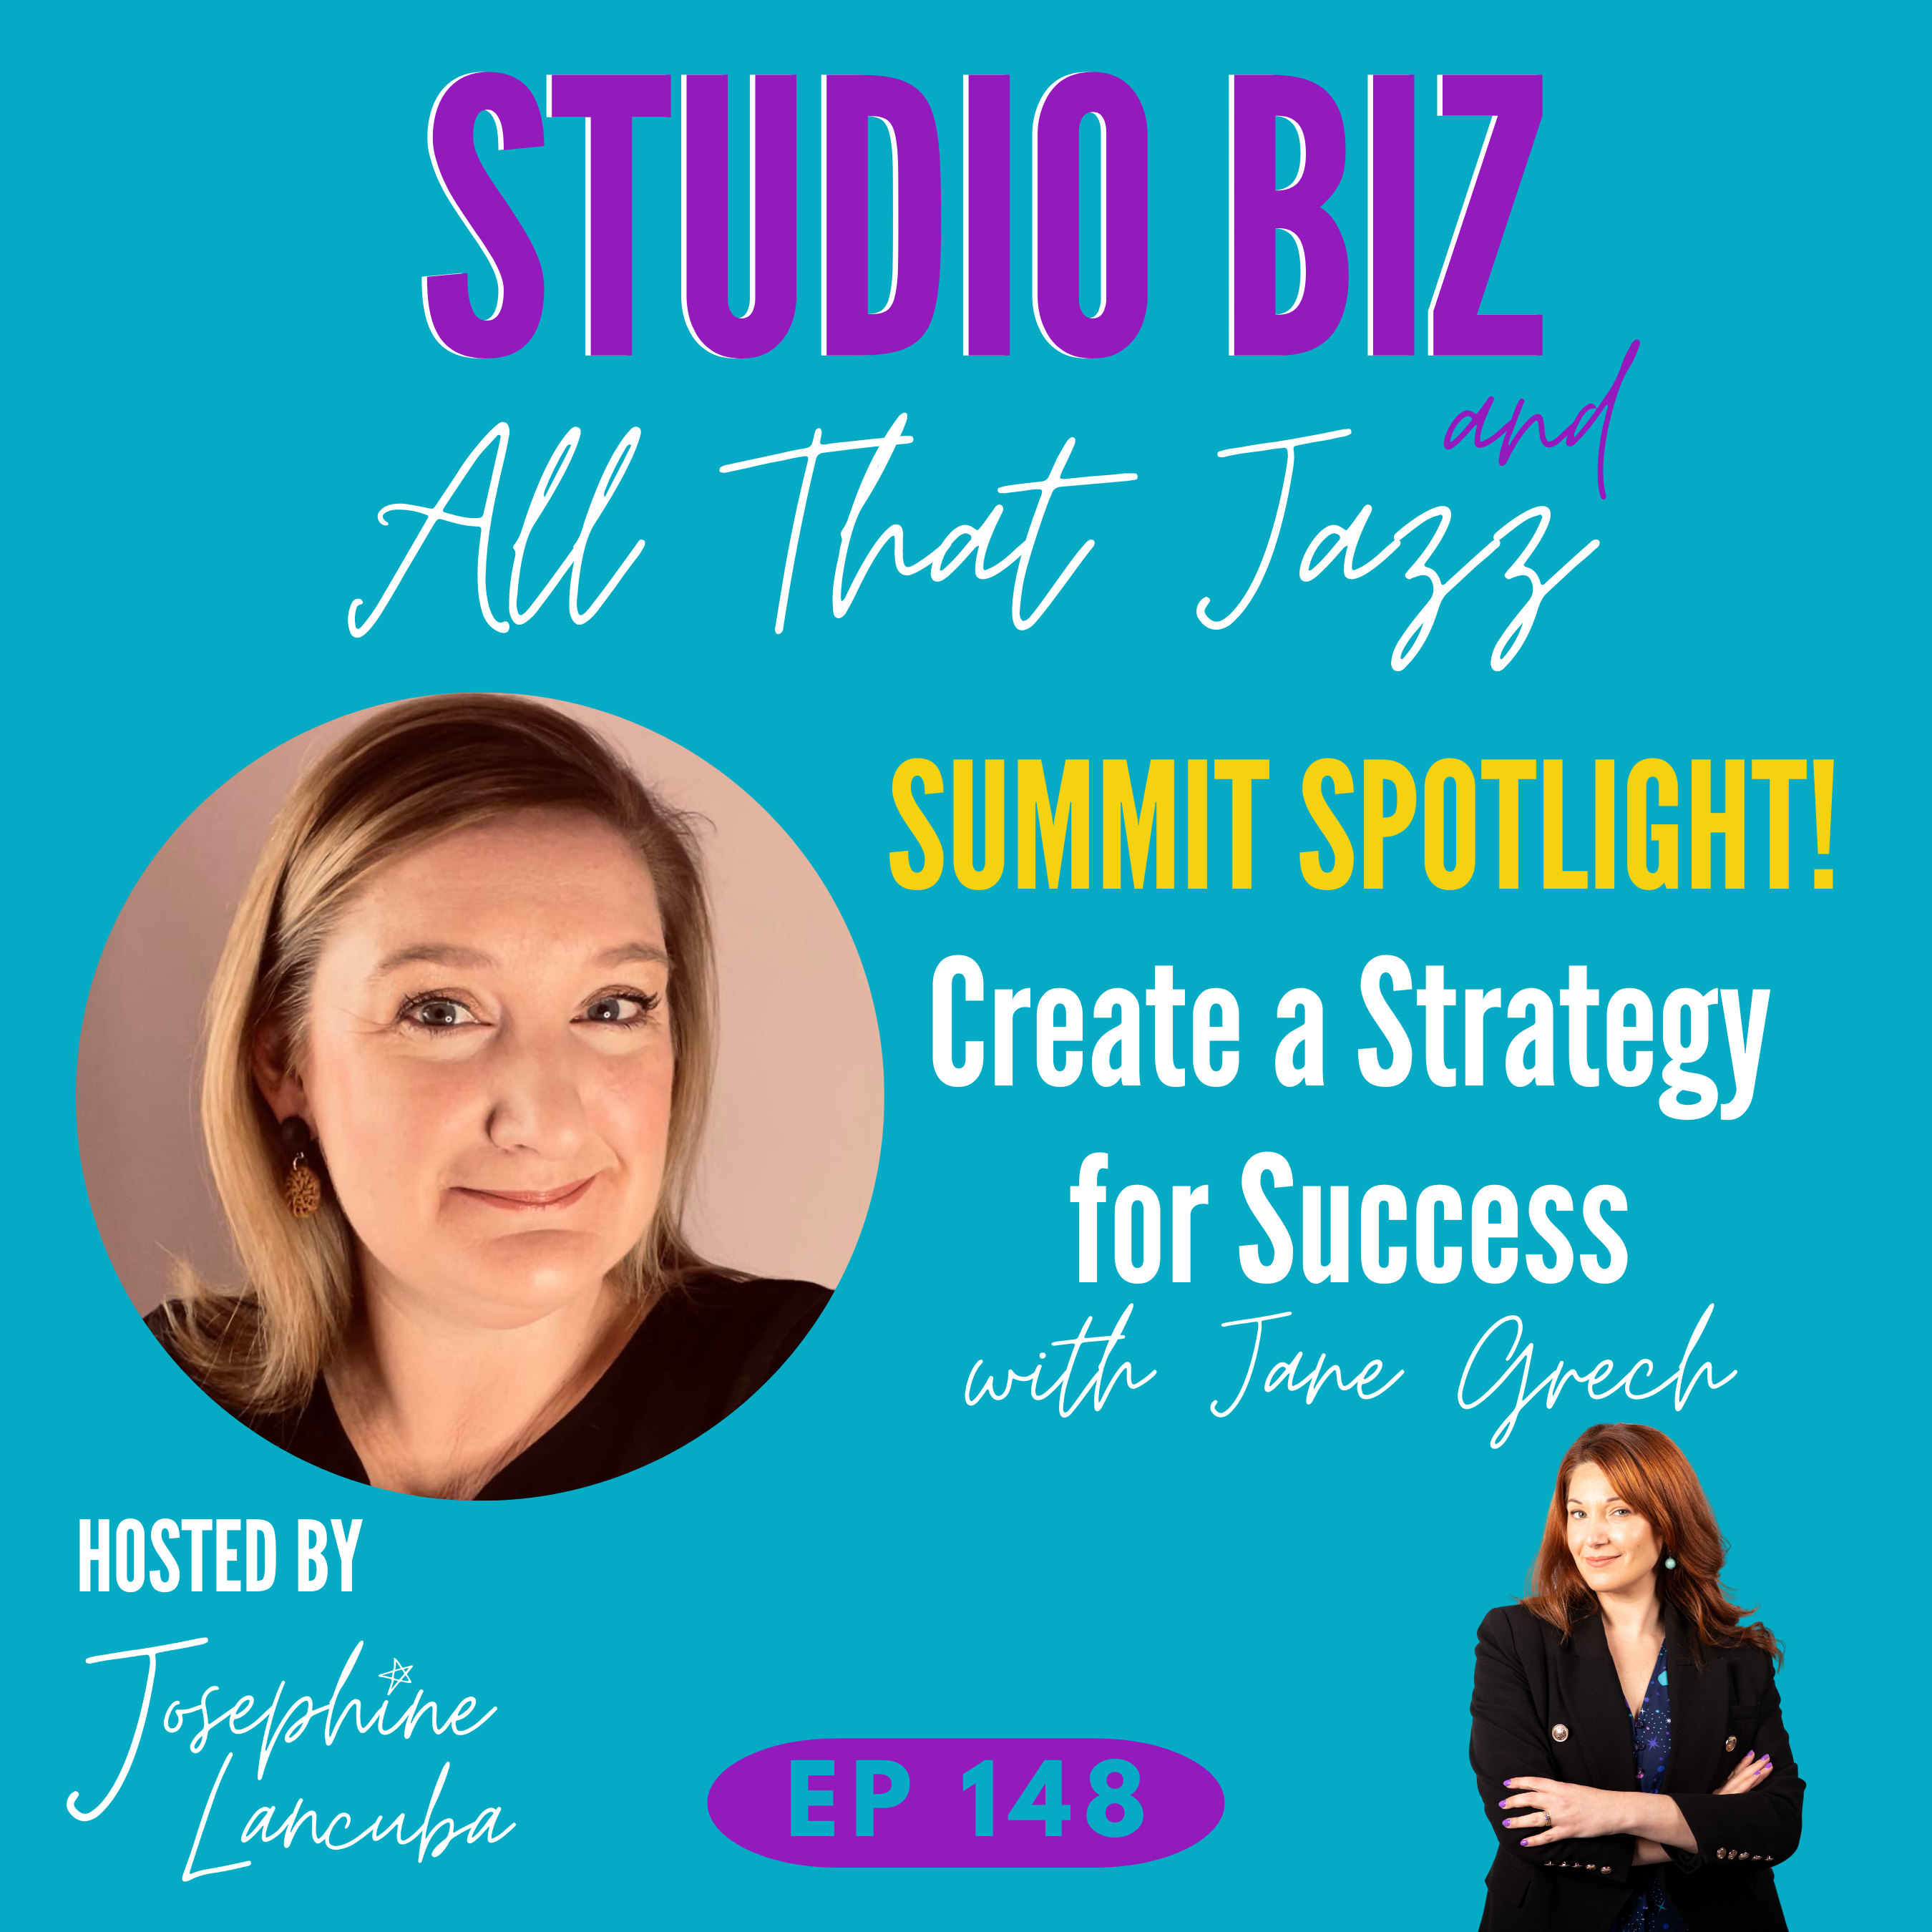 148: SUMMIT SPOTLIGHT! Create a Strategy for Success with Jane Grech